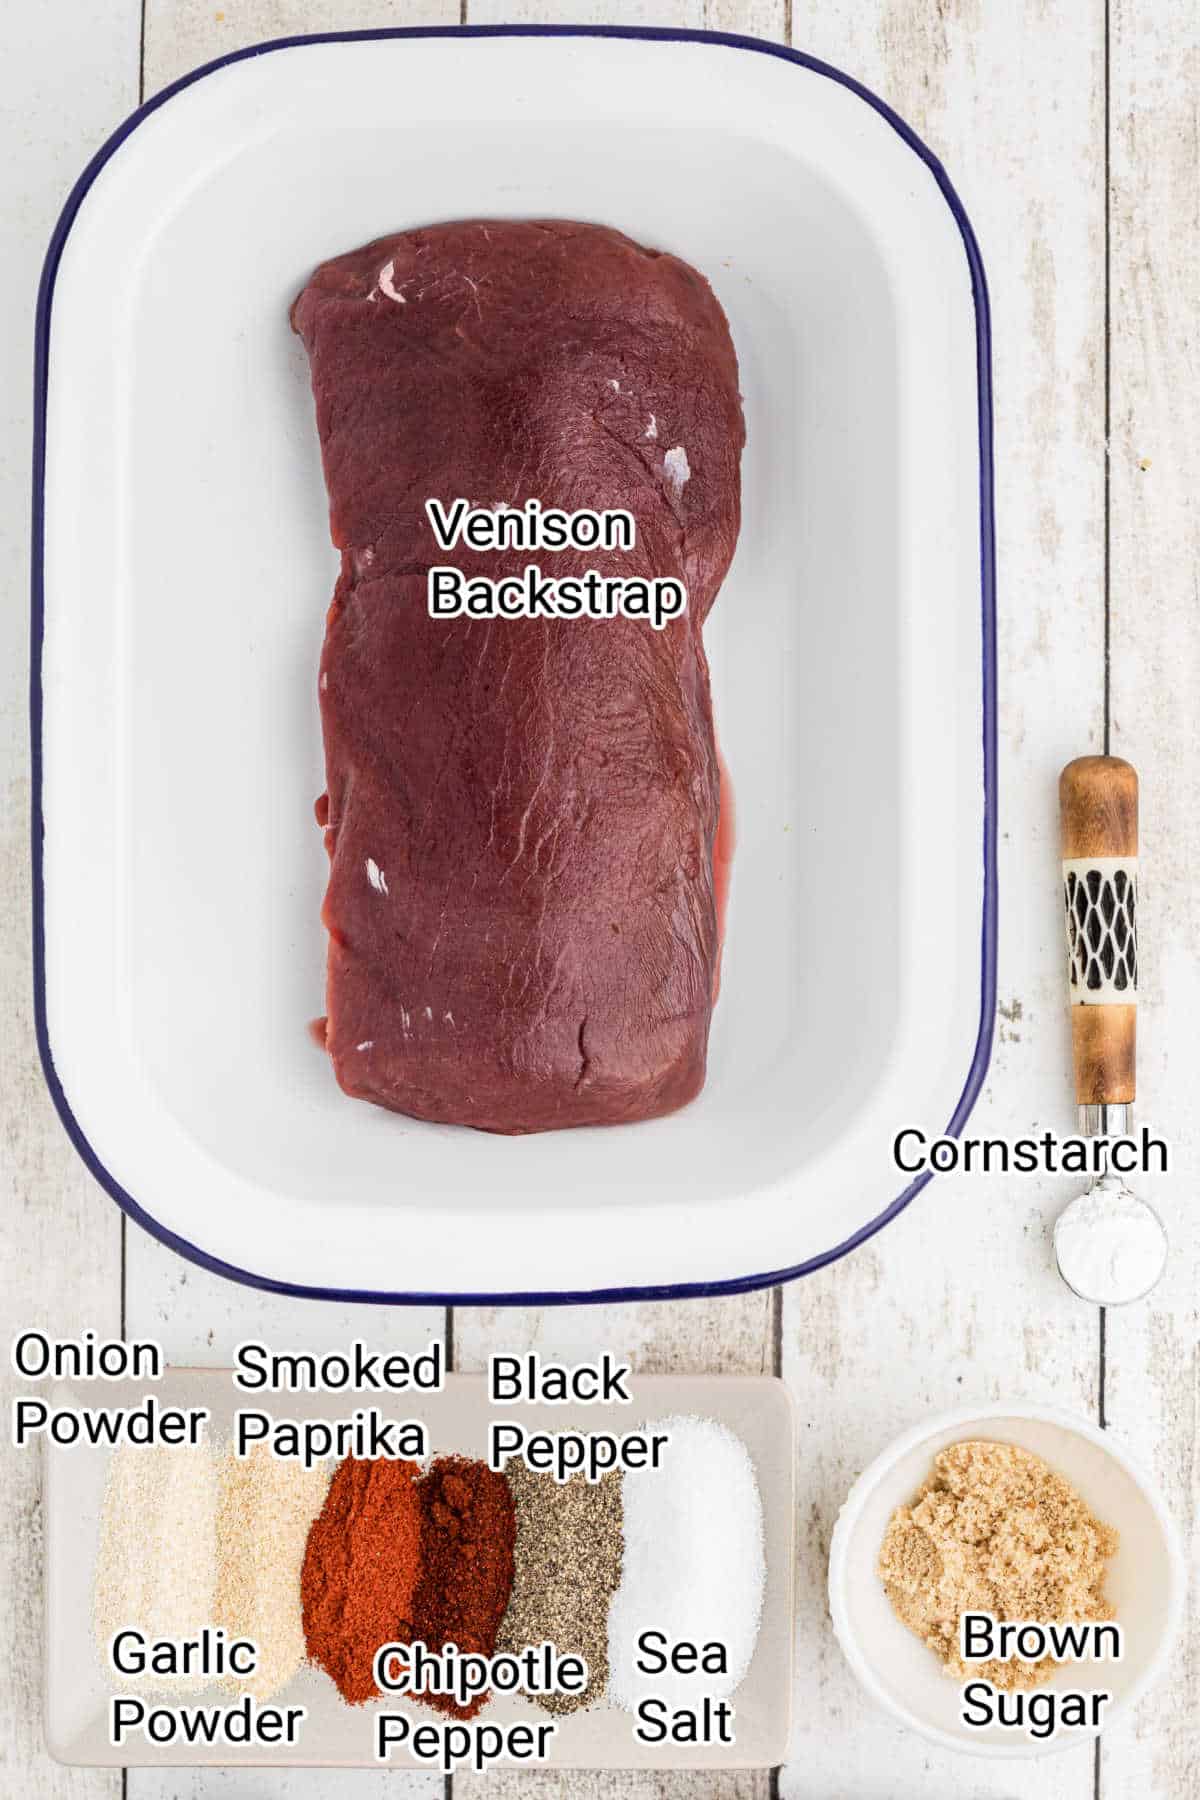 ingredients needed for a smoked venison backstrap recipe